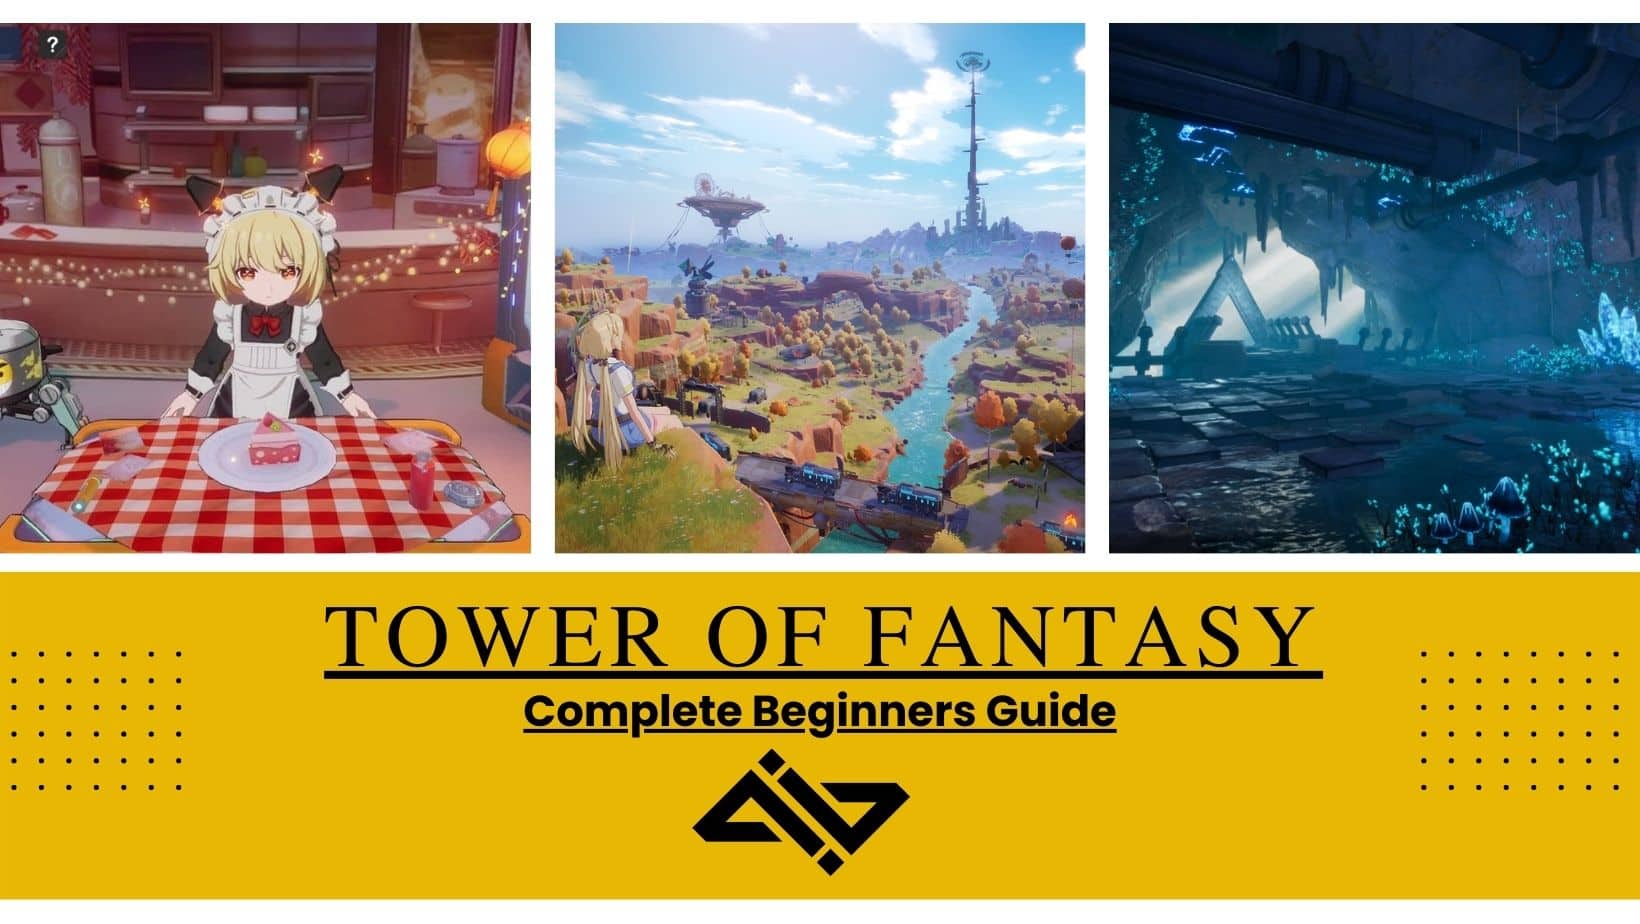 Tower of Fantasy Complete Beginners Guide